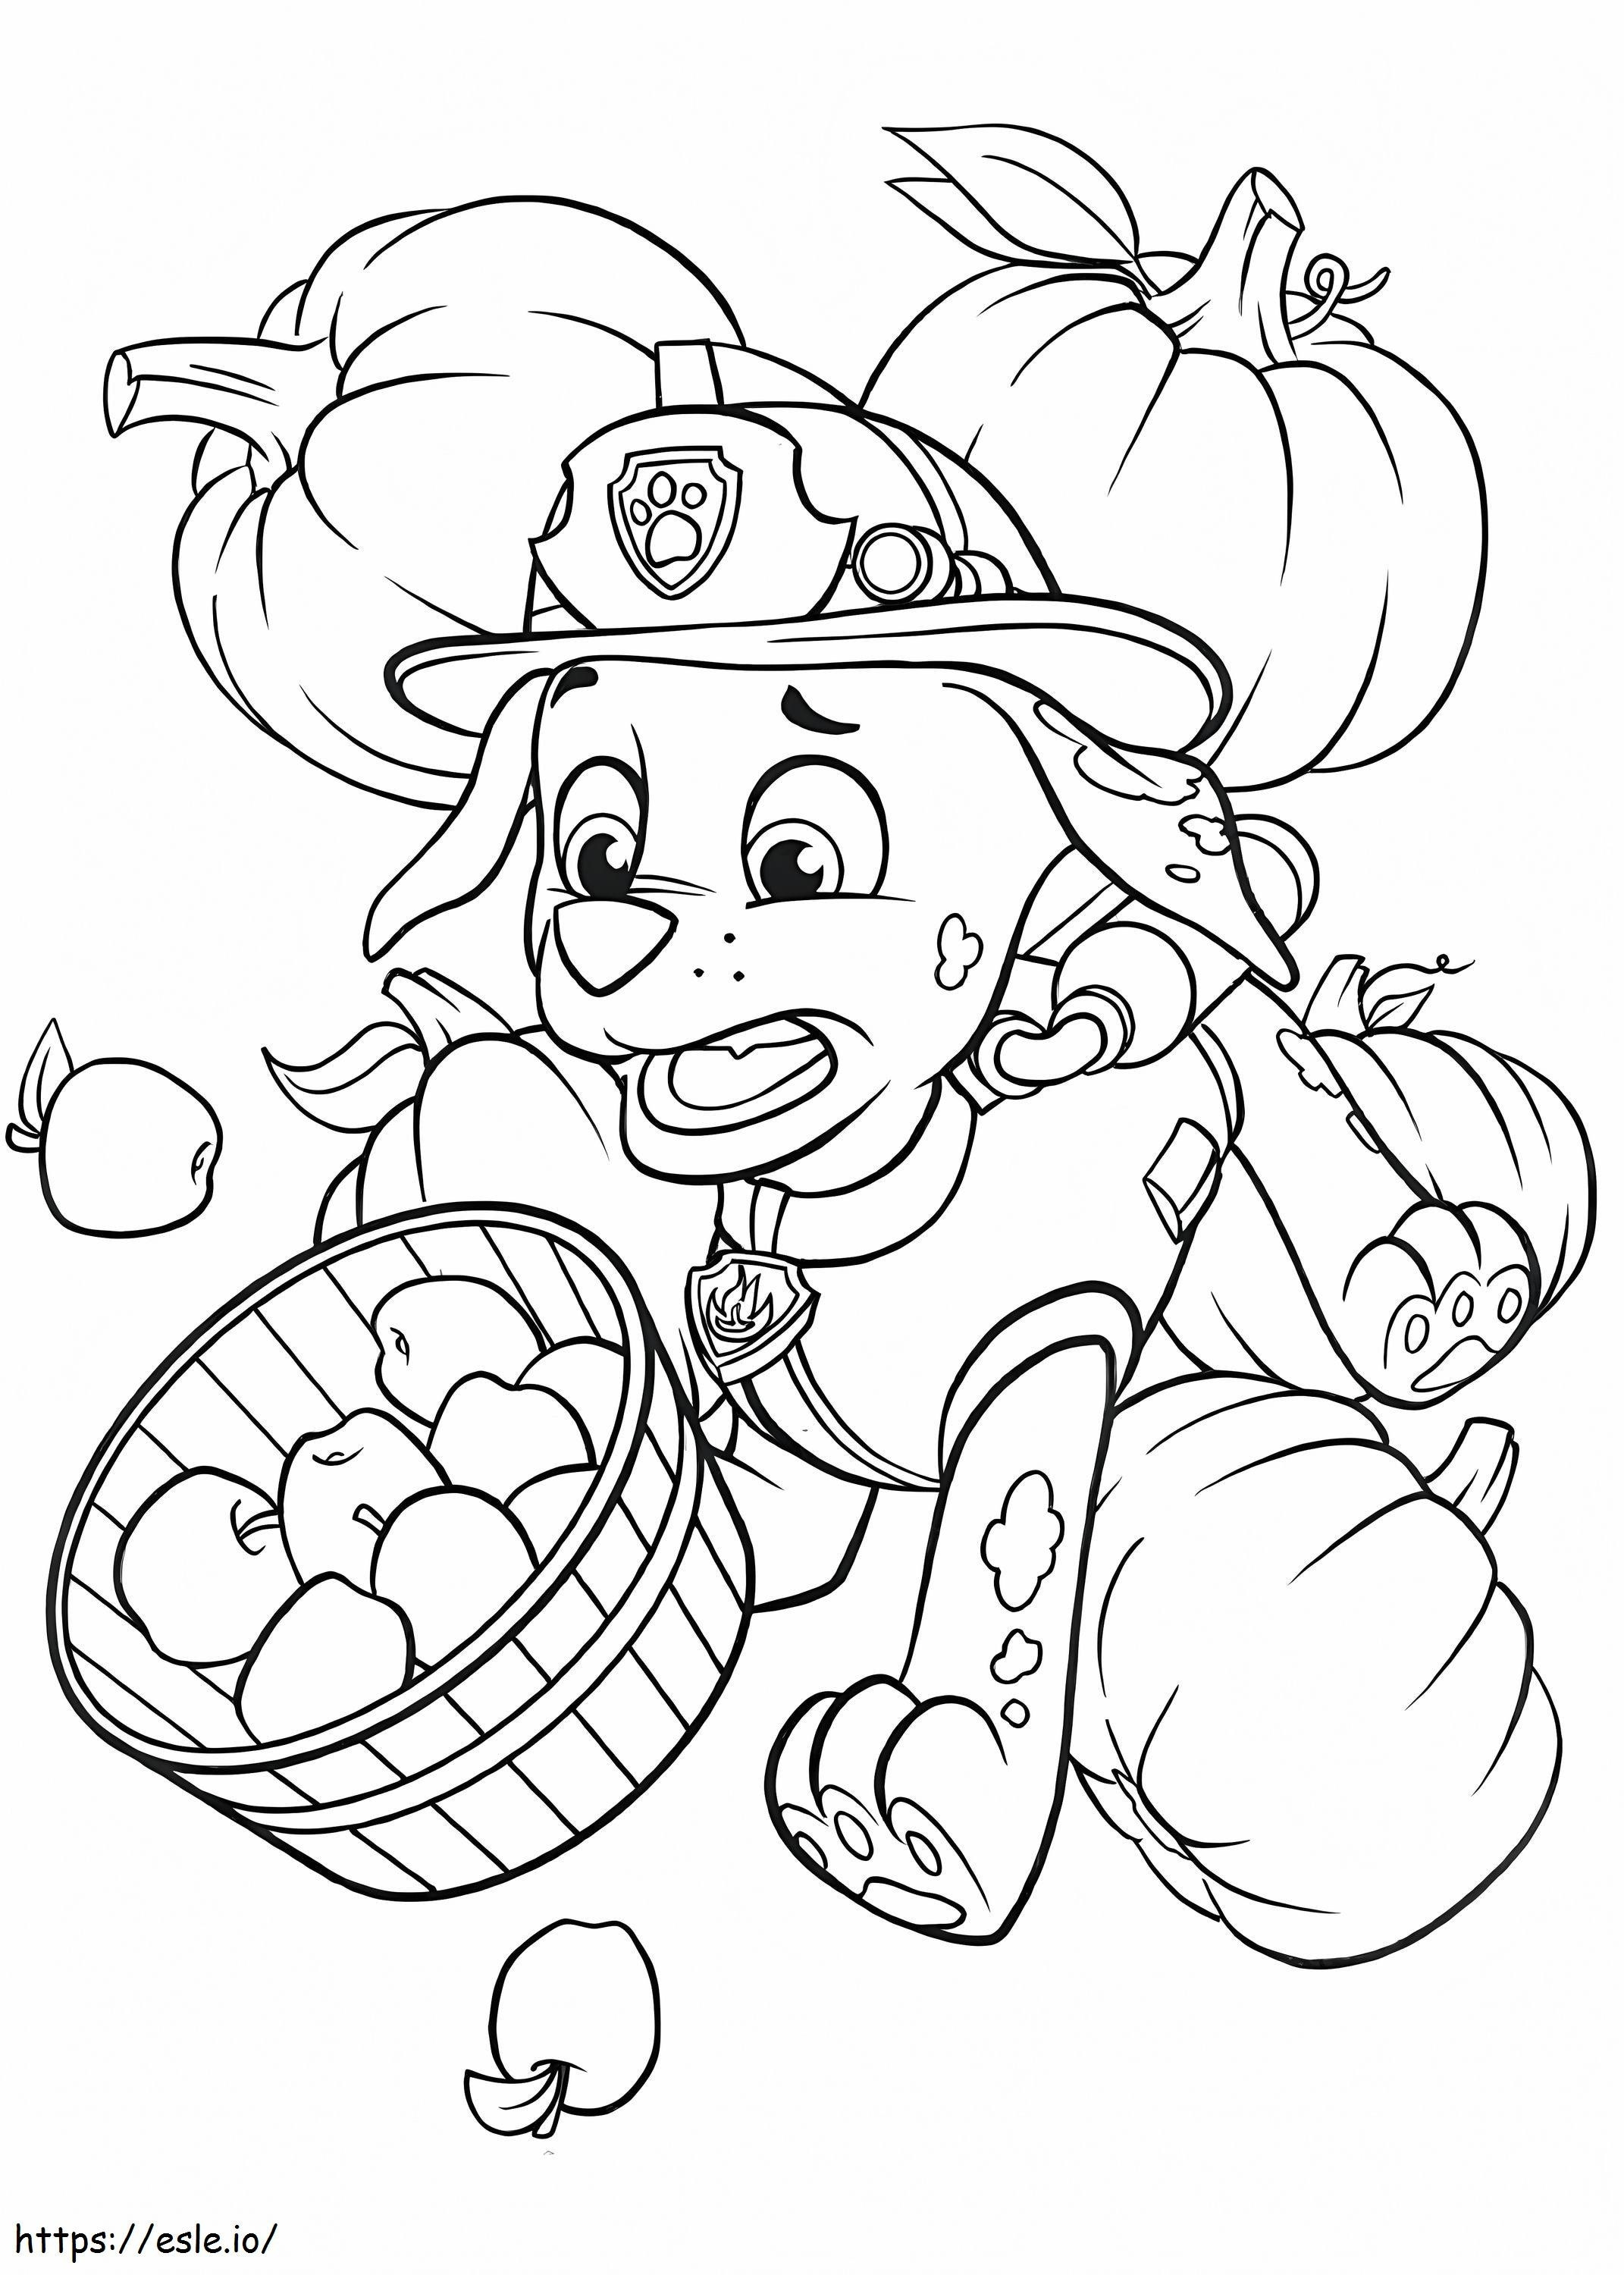 Rocky With Pumpkins N Apples A4 coloring page